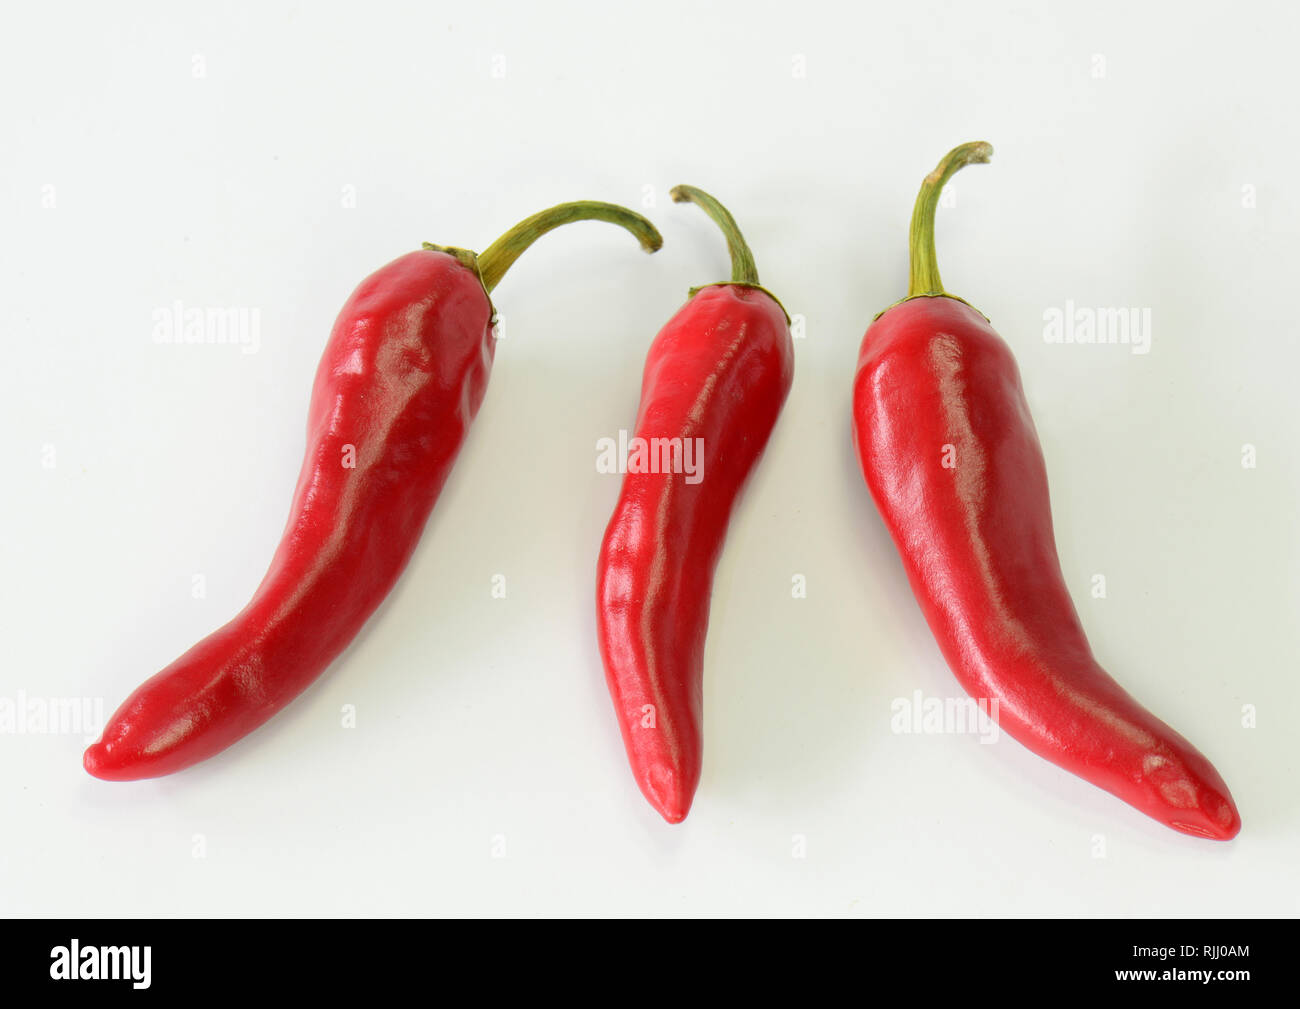 Chili Pepper (Capsicum annuum). Three red ripe fruit. Studio picture against a white background. Germany Stock Photo